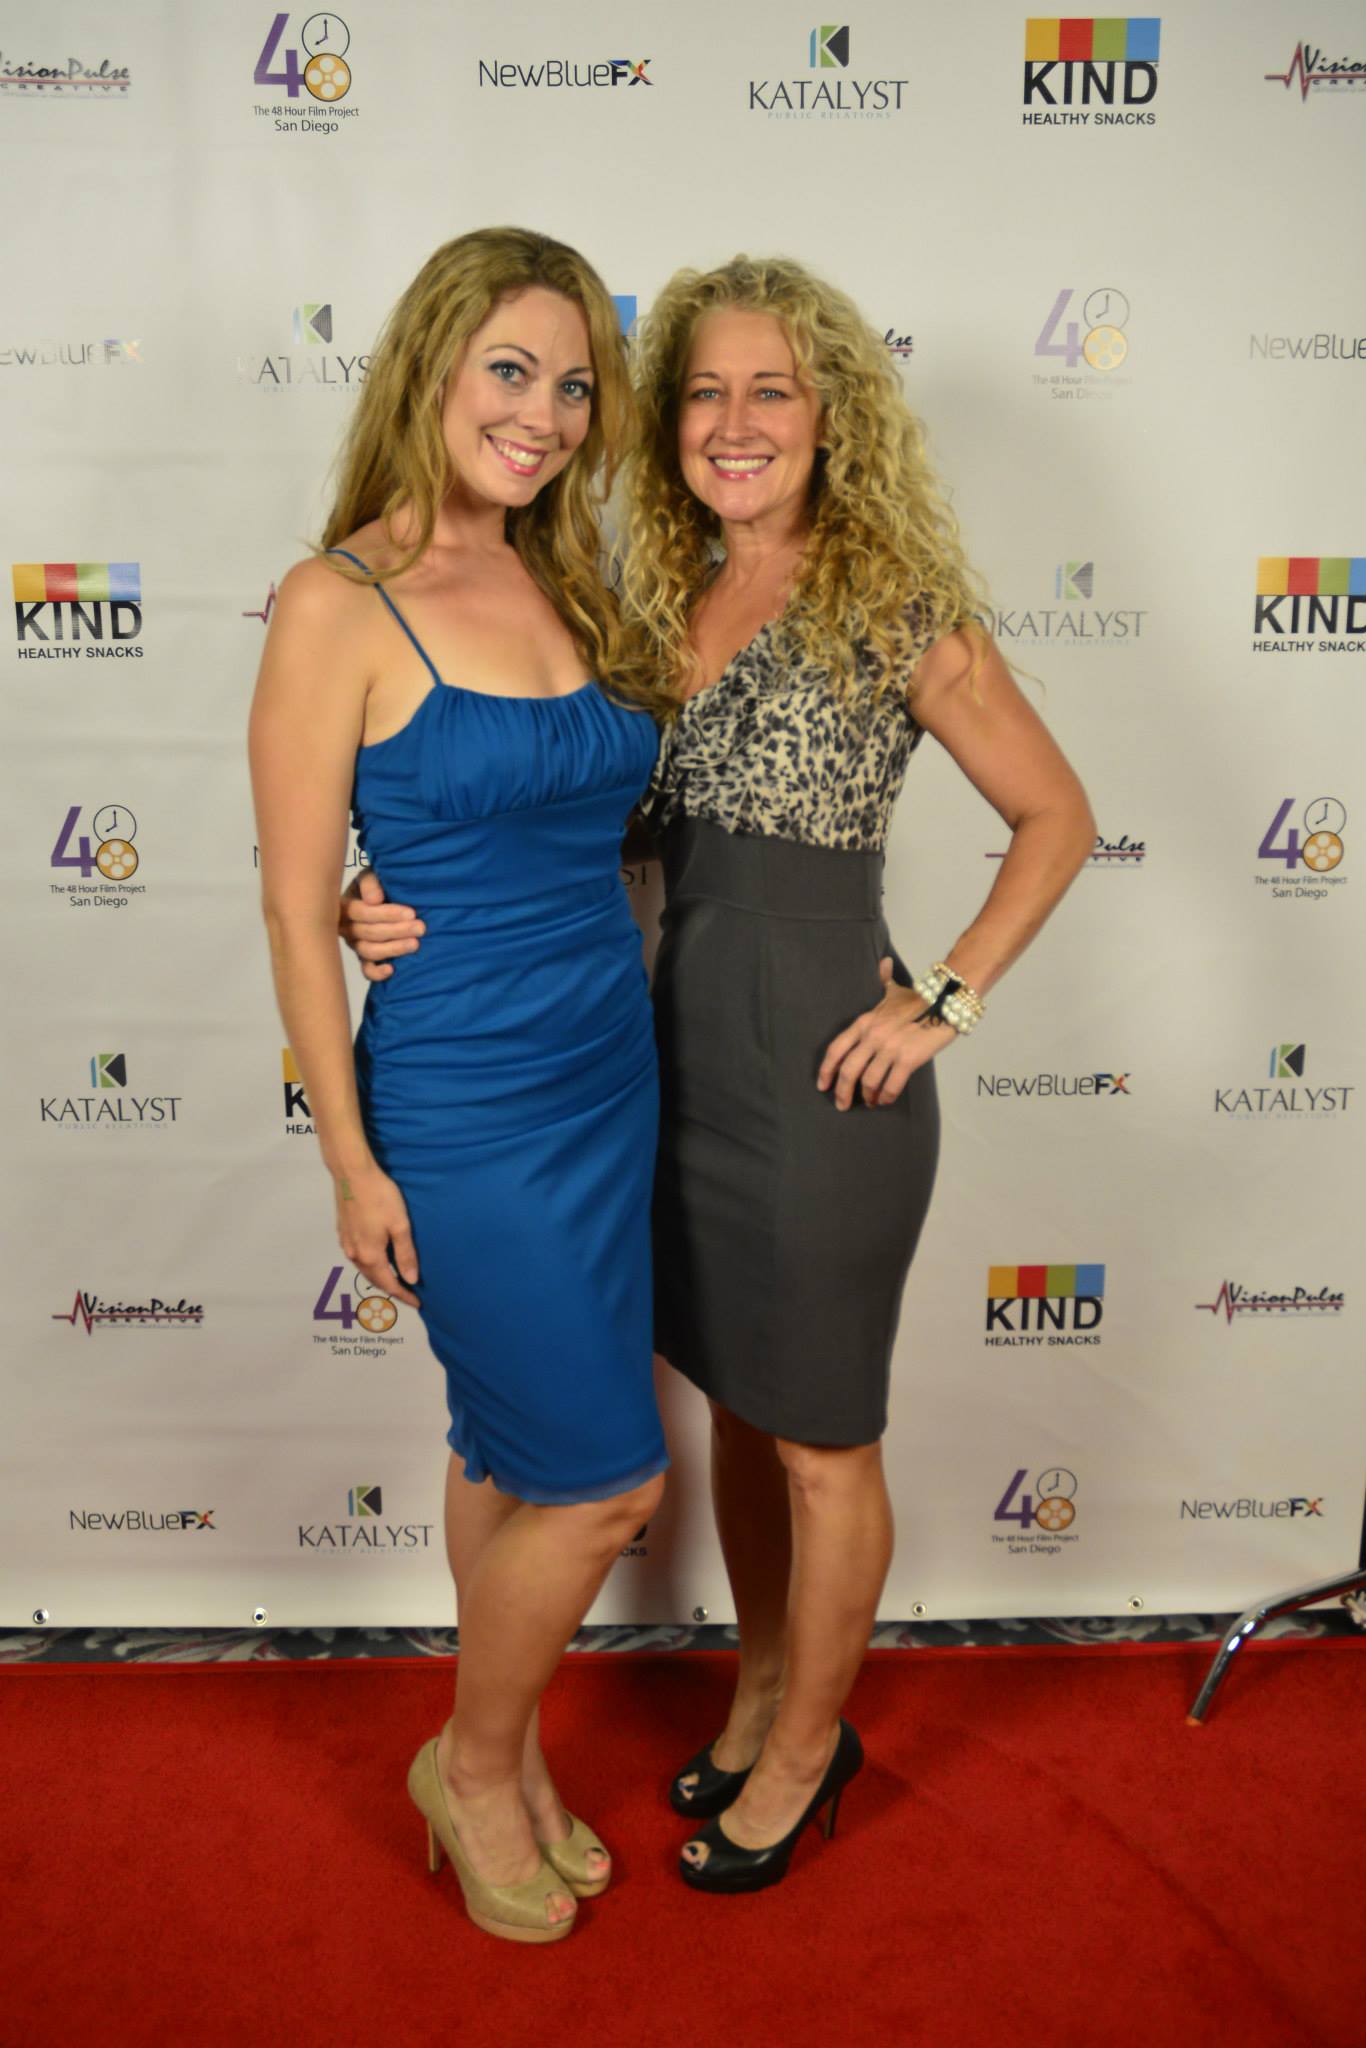 Laura and her friend Kristine at the San Diego 48 Hour Film Festival screenings